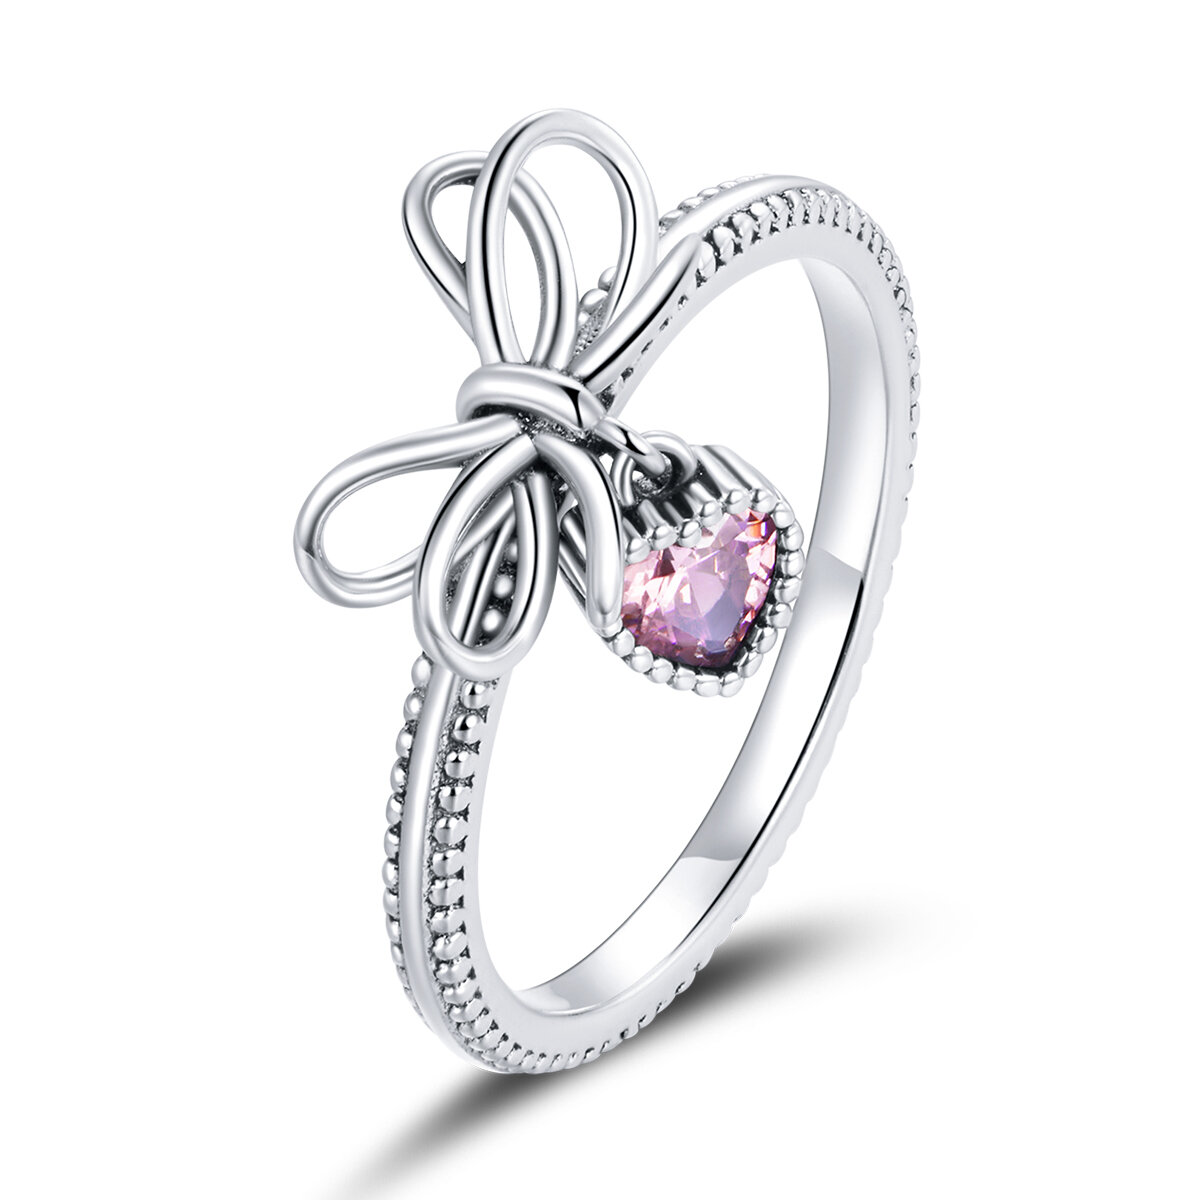 GemKing gift with Bow S925 Sterling Silver rings